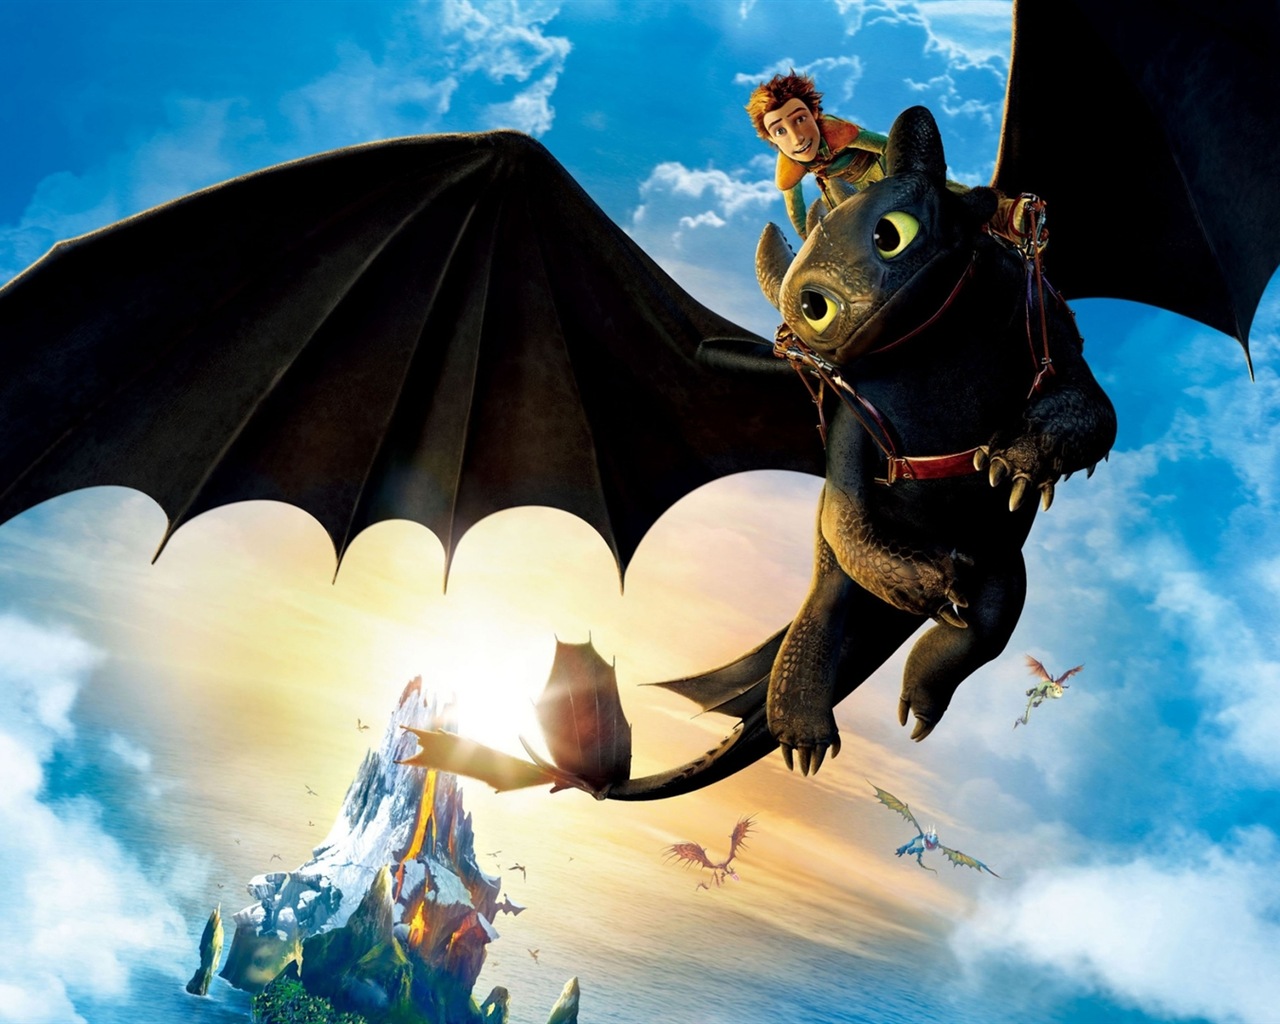 How to Train Your Dragon 2 HD wallpapers #1 - 1280x1024